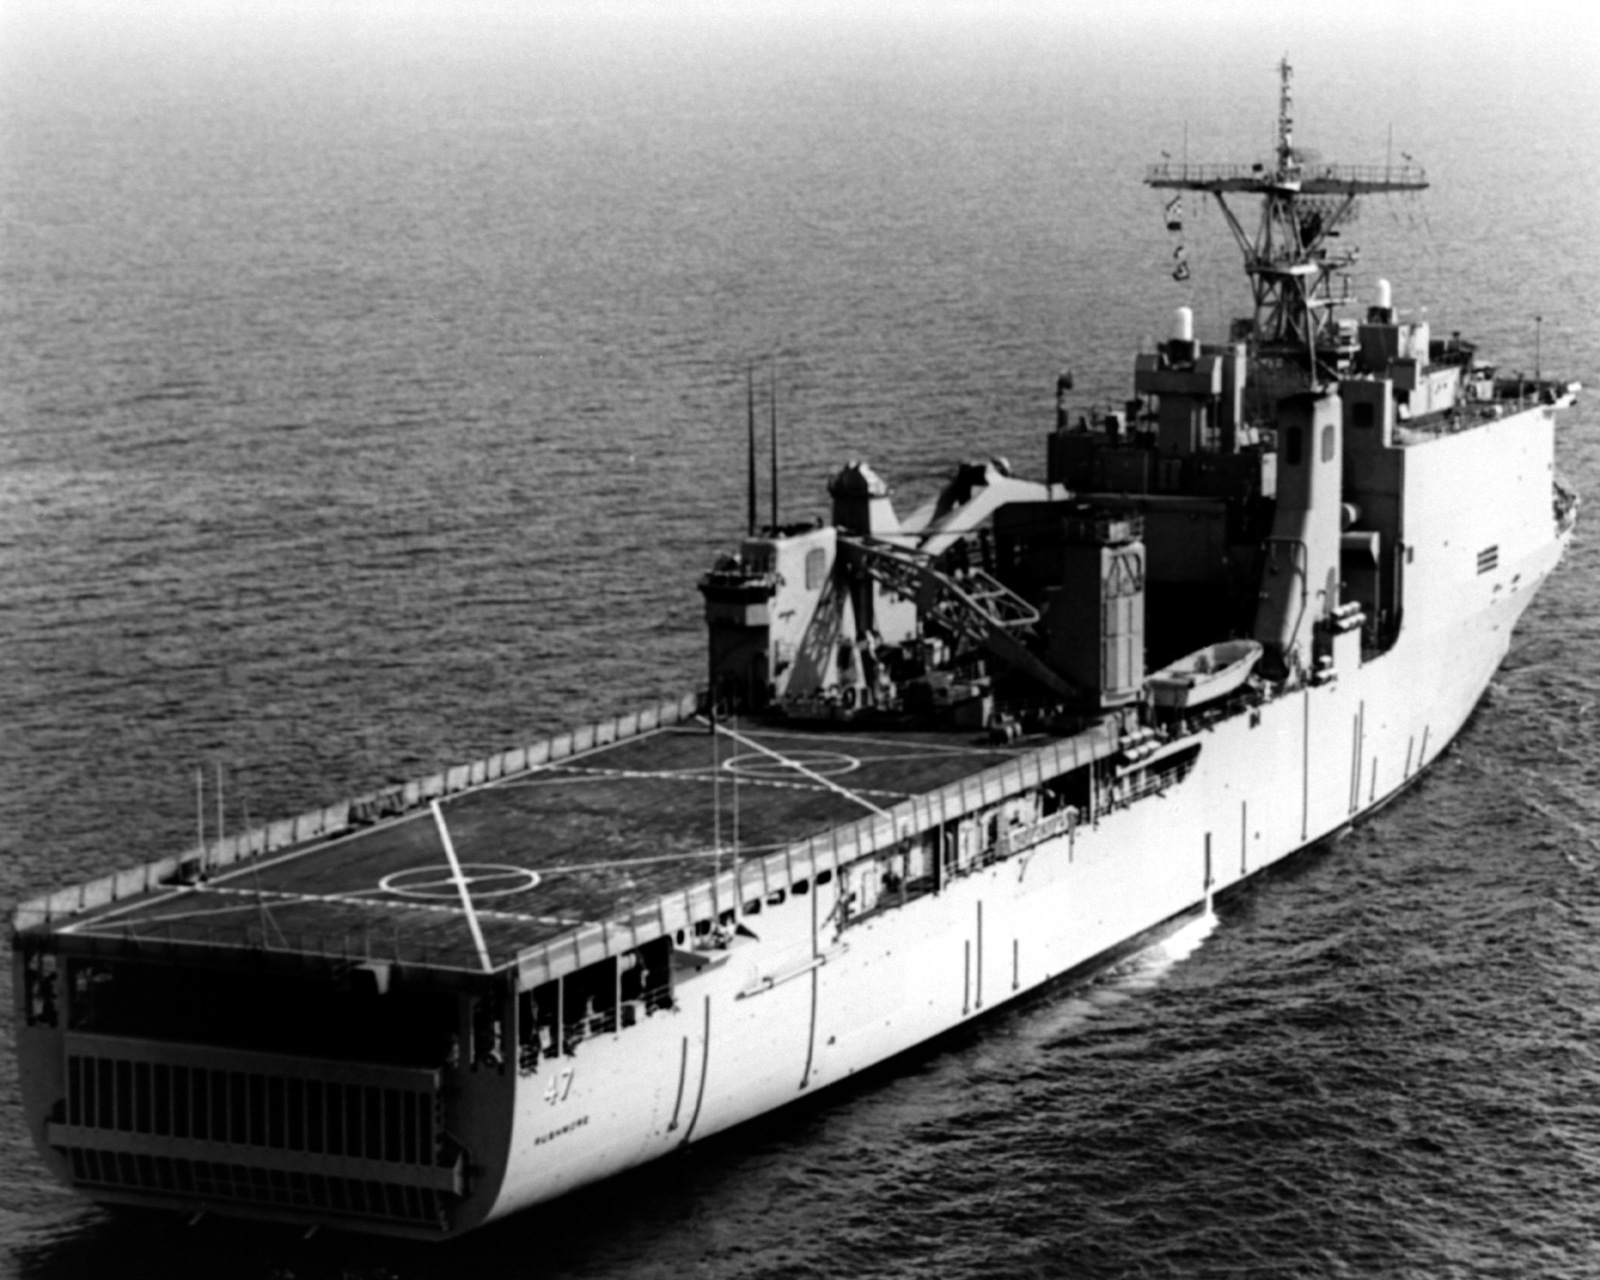 A Starboard Quarter View Of The Dock Landing Ship Uss Rushmore Lsd 47 Underway U S National Archives Public Domain Image